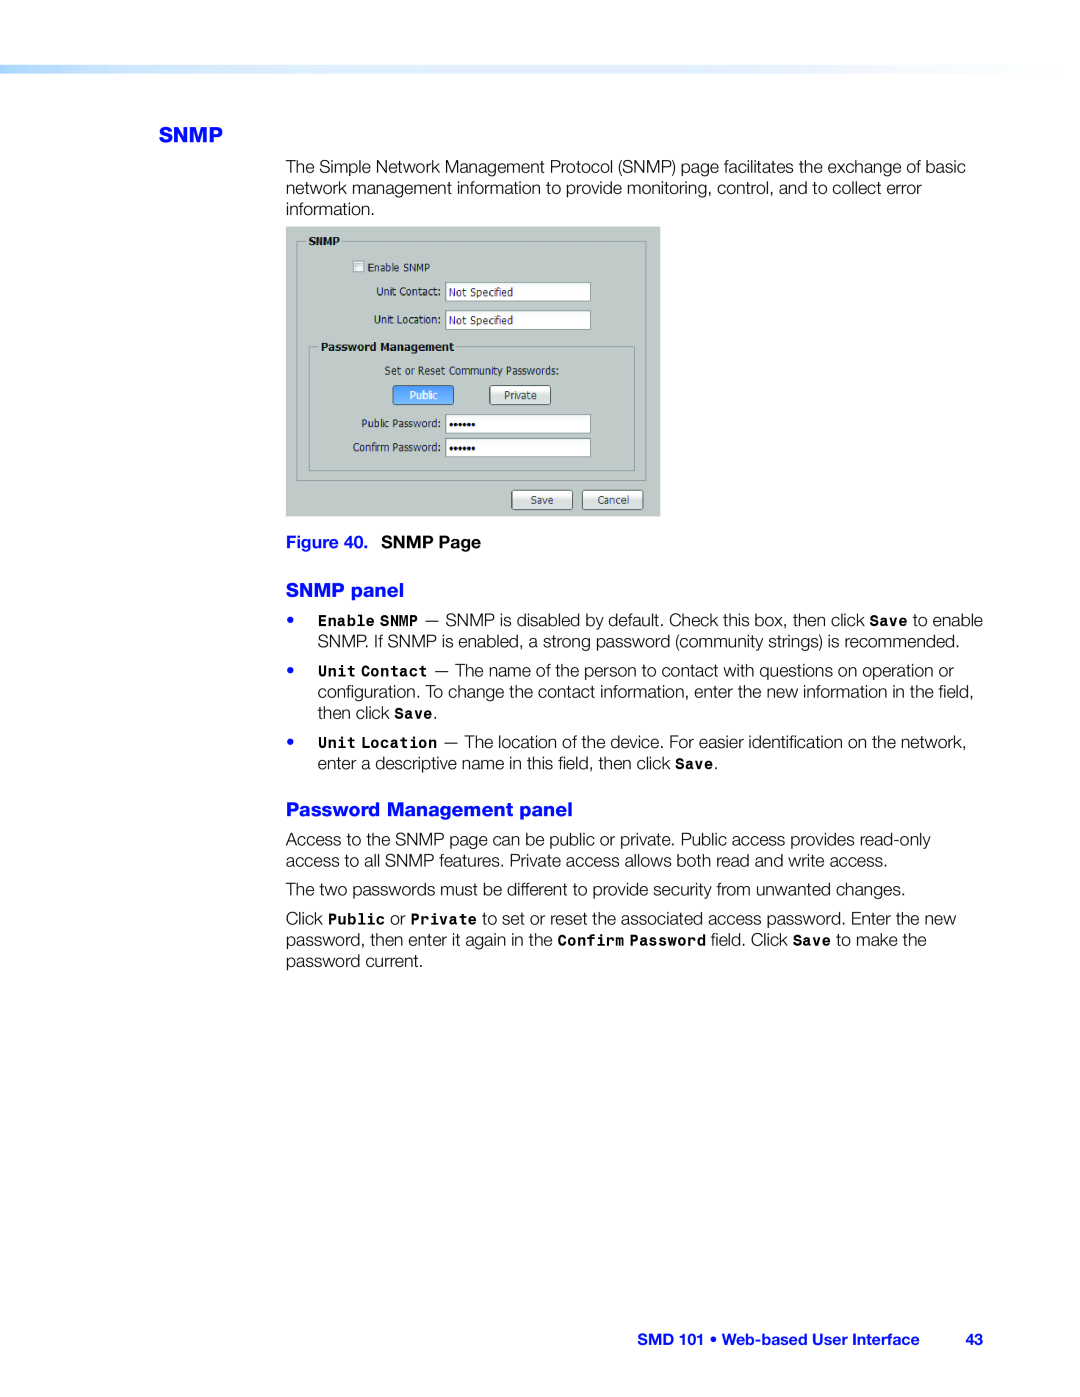 Extron electronic SMD 101 manual Snmp, SNMP panel, Password Management panel, SNMP Page 